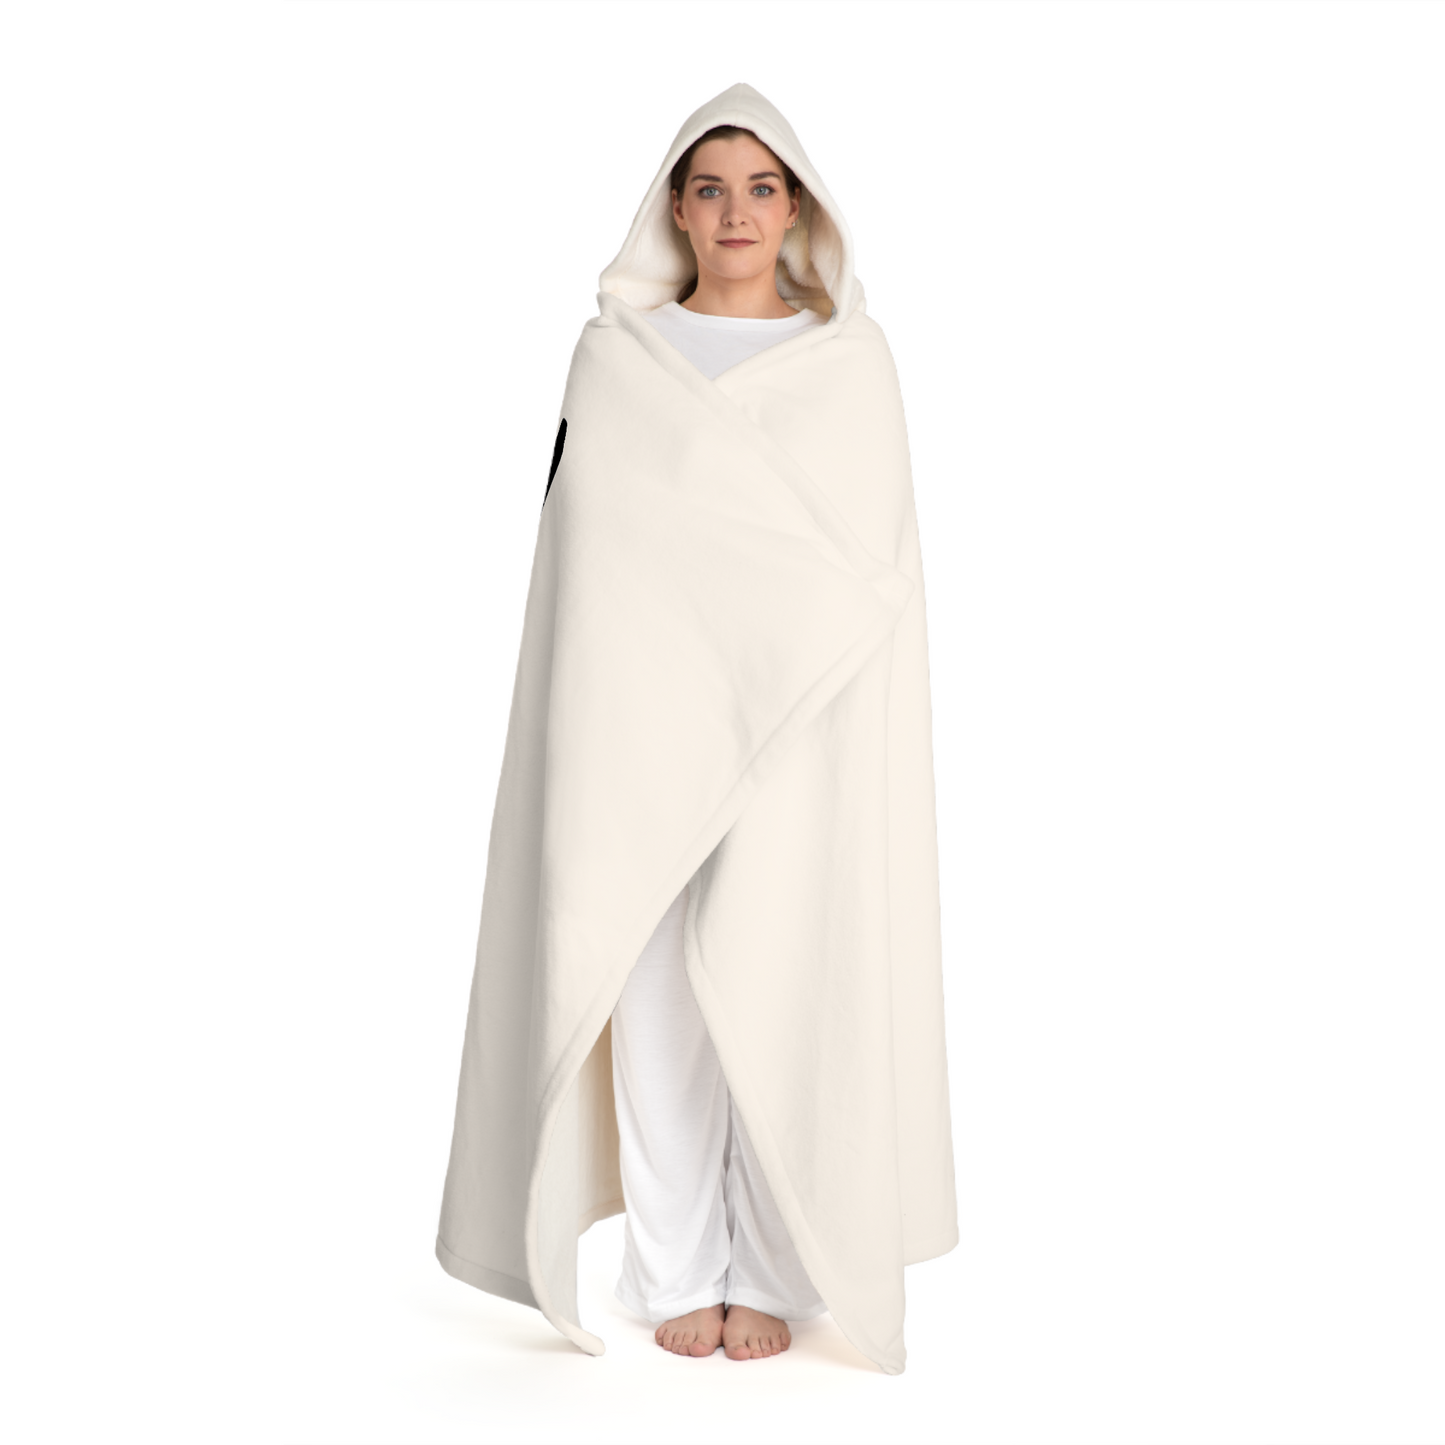 "Know God Will" Hooded Blanket